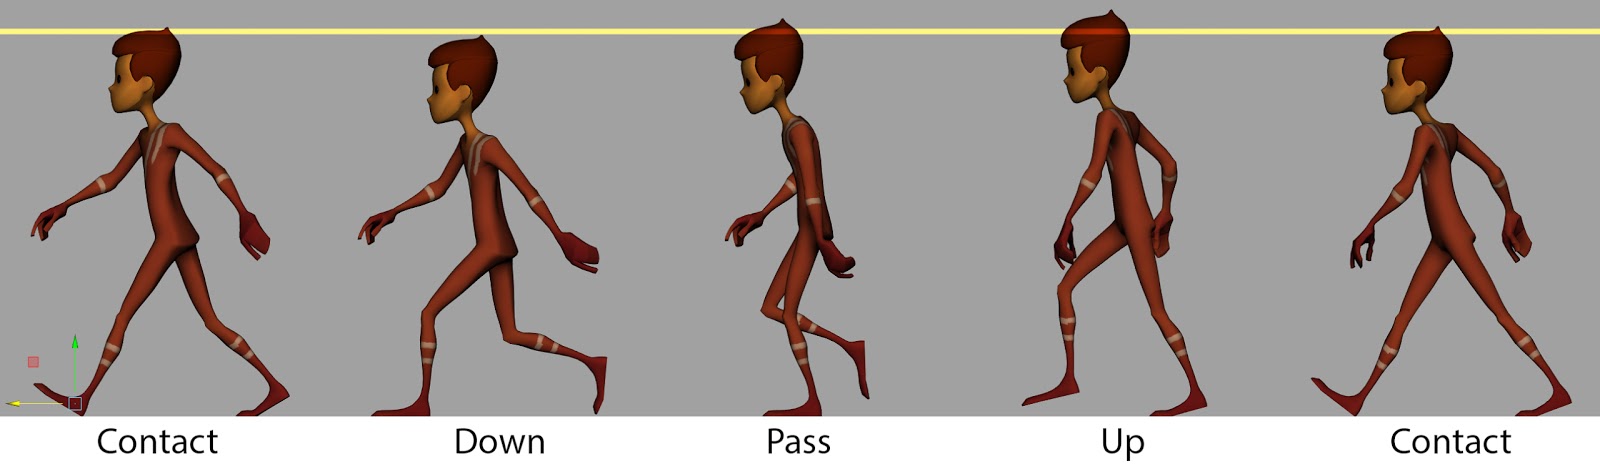 Walk Cycle Walk Cycle Animation Walk Cycle Walk Cycle Animation Images